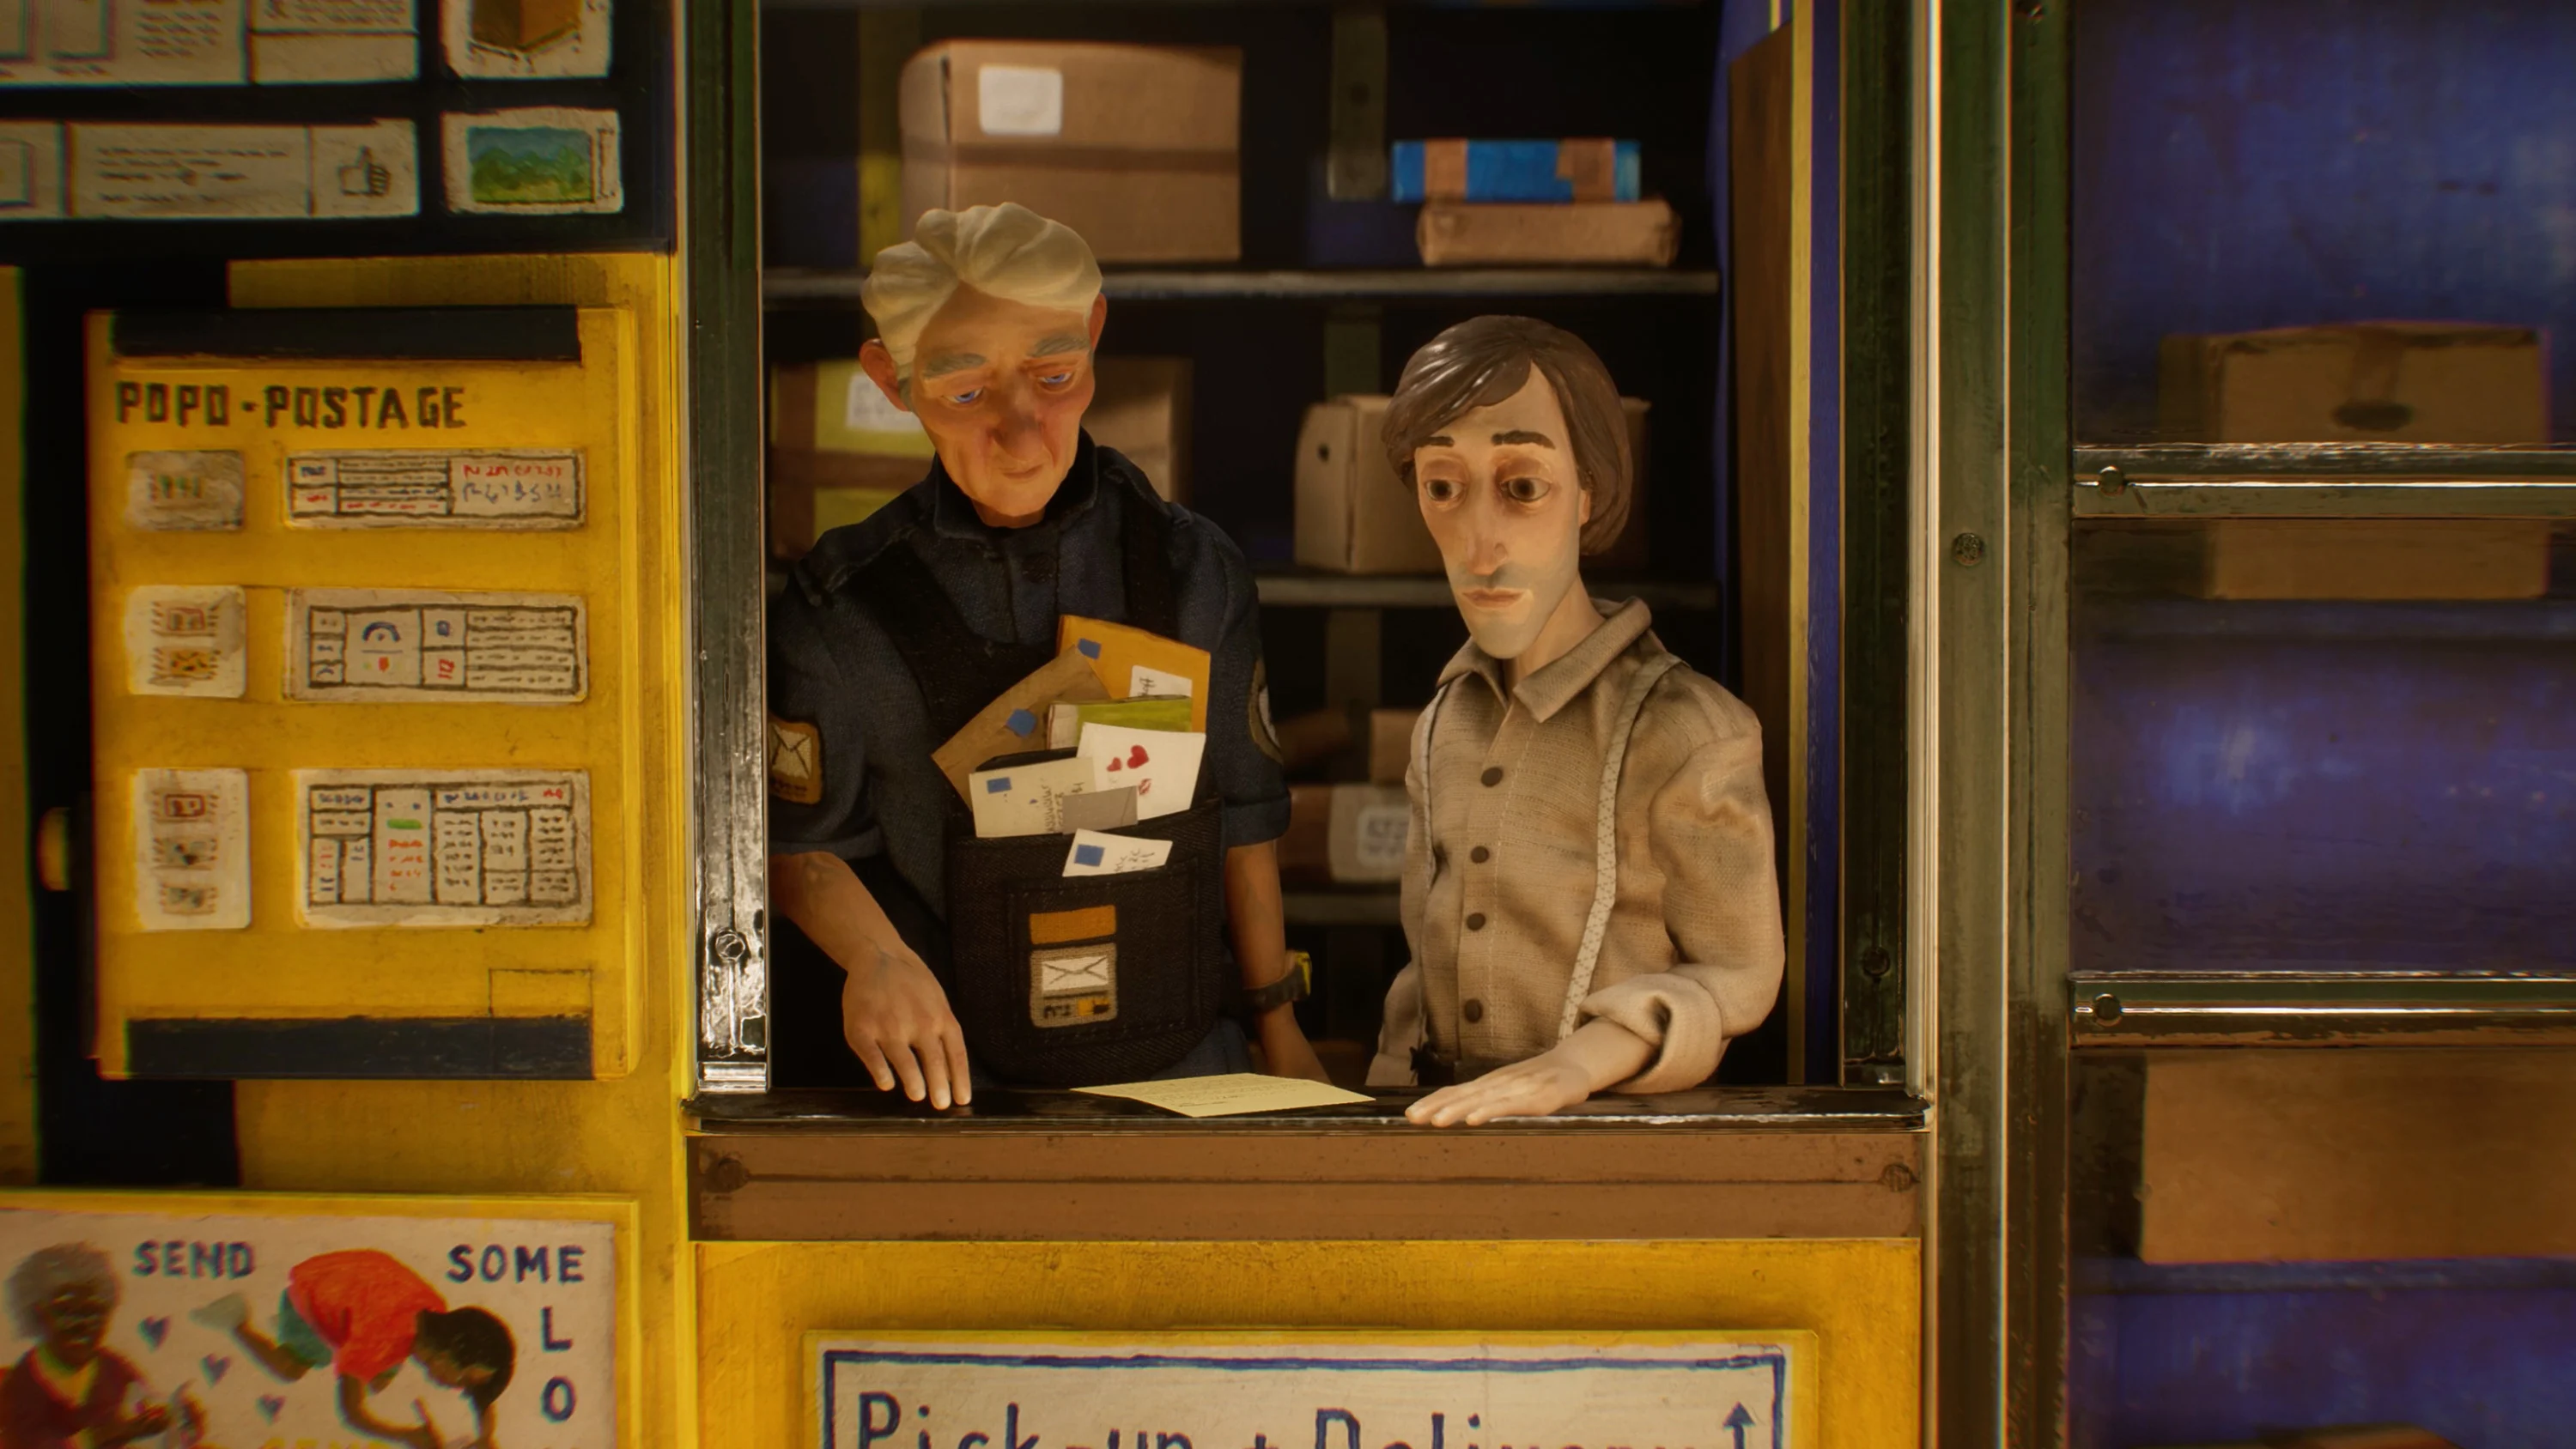 A still from the handmade video game Harold Halibut. The still shows two men standing in a mailroom together and reading a letter that is placed on the table in front of them.